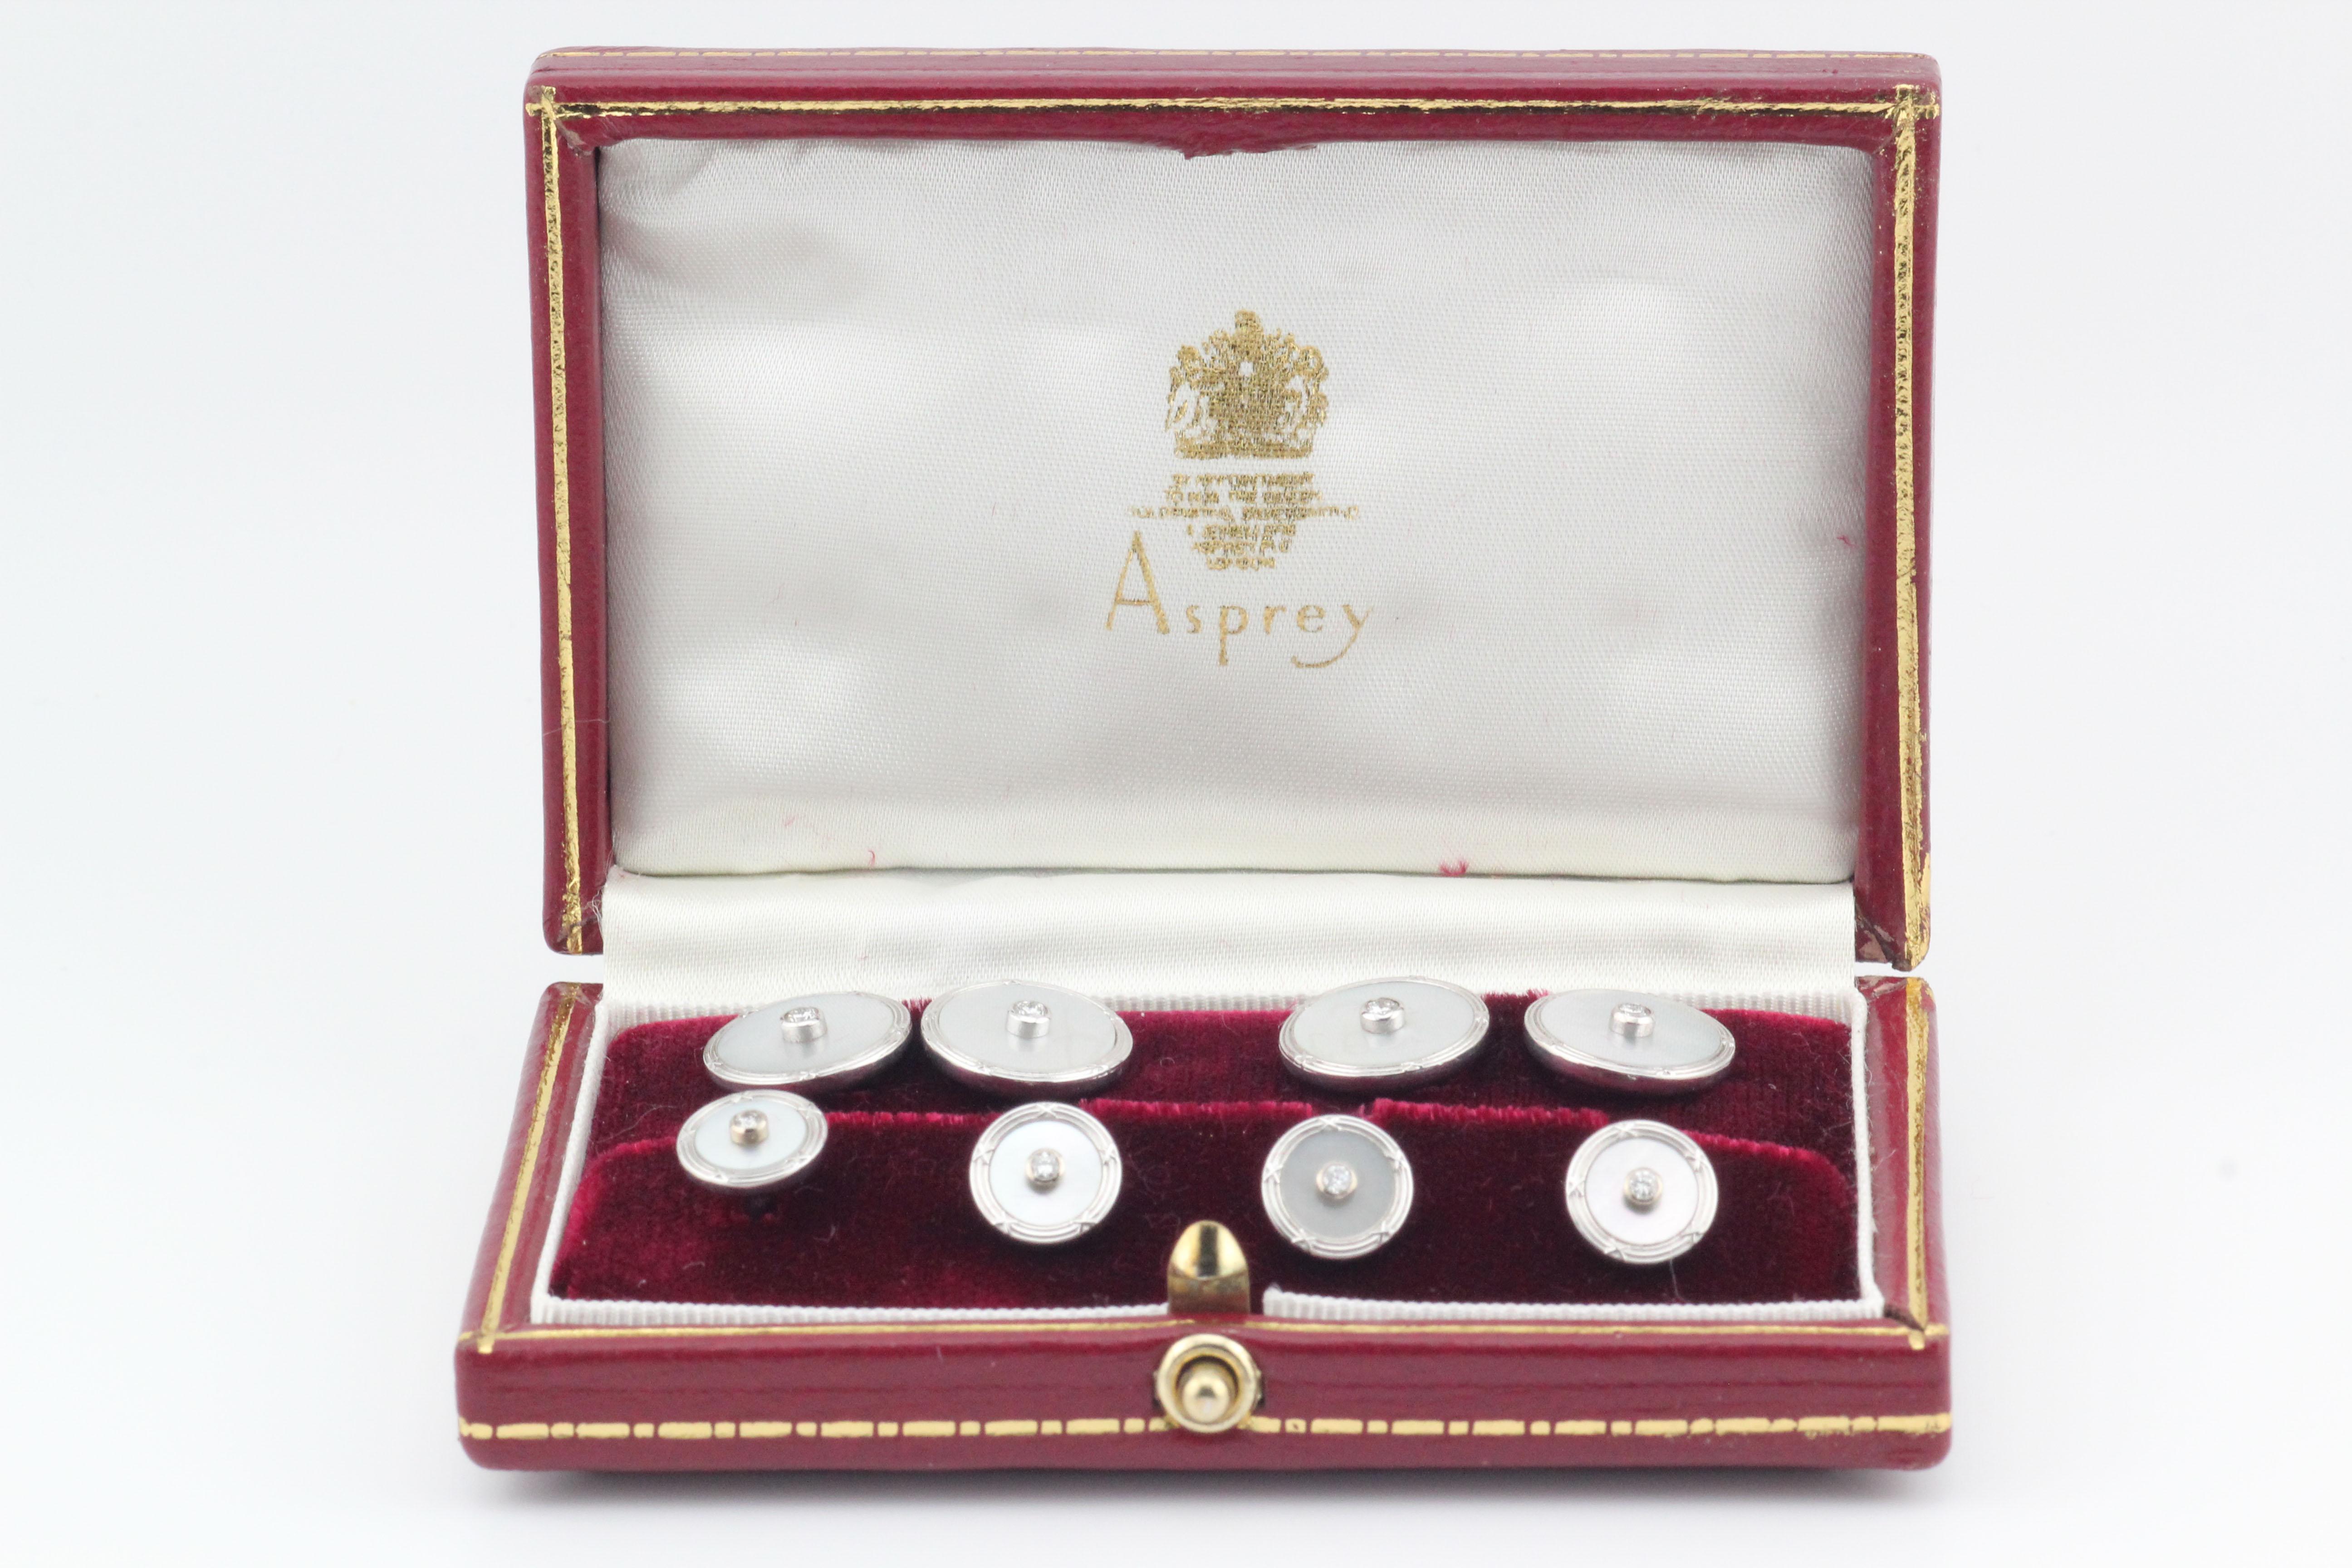 Fine set of Mother of pearl diamond and 18k white gold cufflinks and studs tuxedo set, by Asprey circa 1990s.   

This Asprey set is a luxurious and sophisticated accessory collection designed for formal occasions. Asprey, known for its exquisite